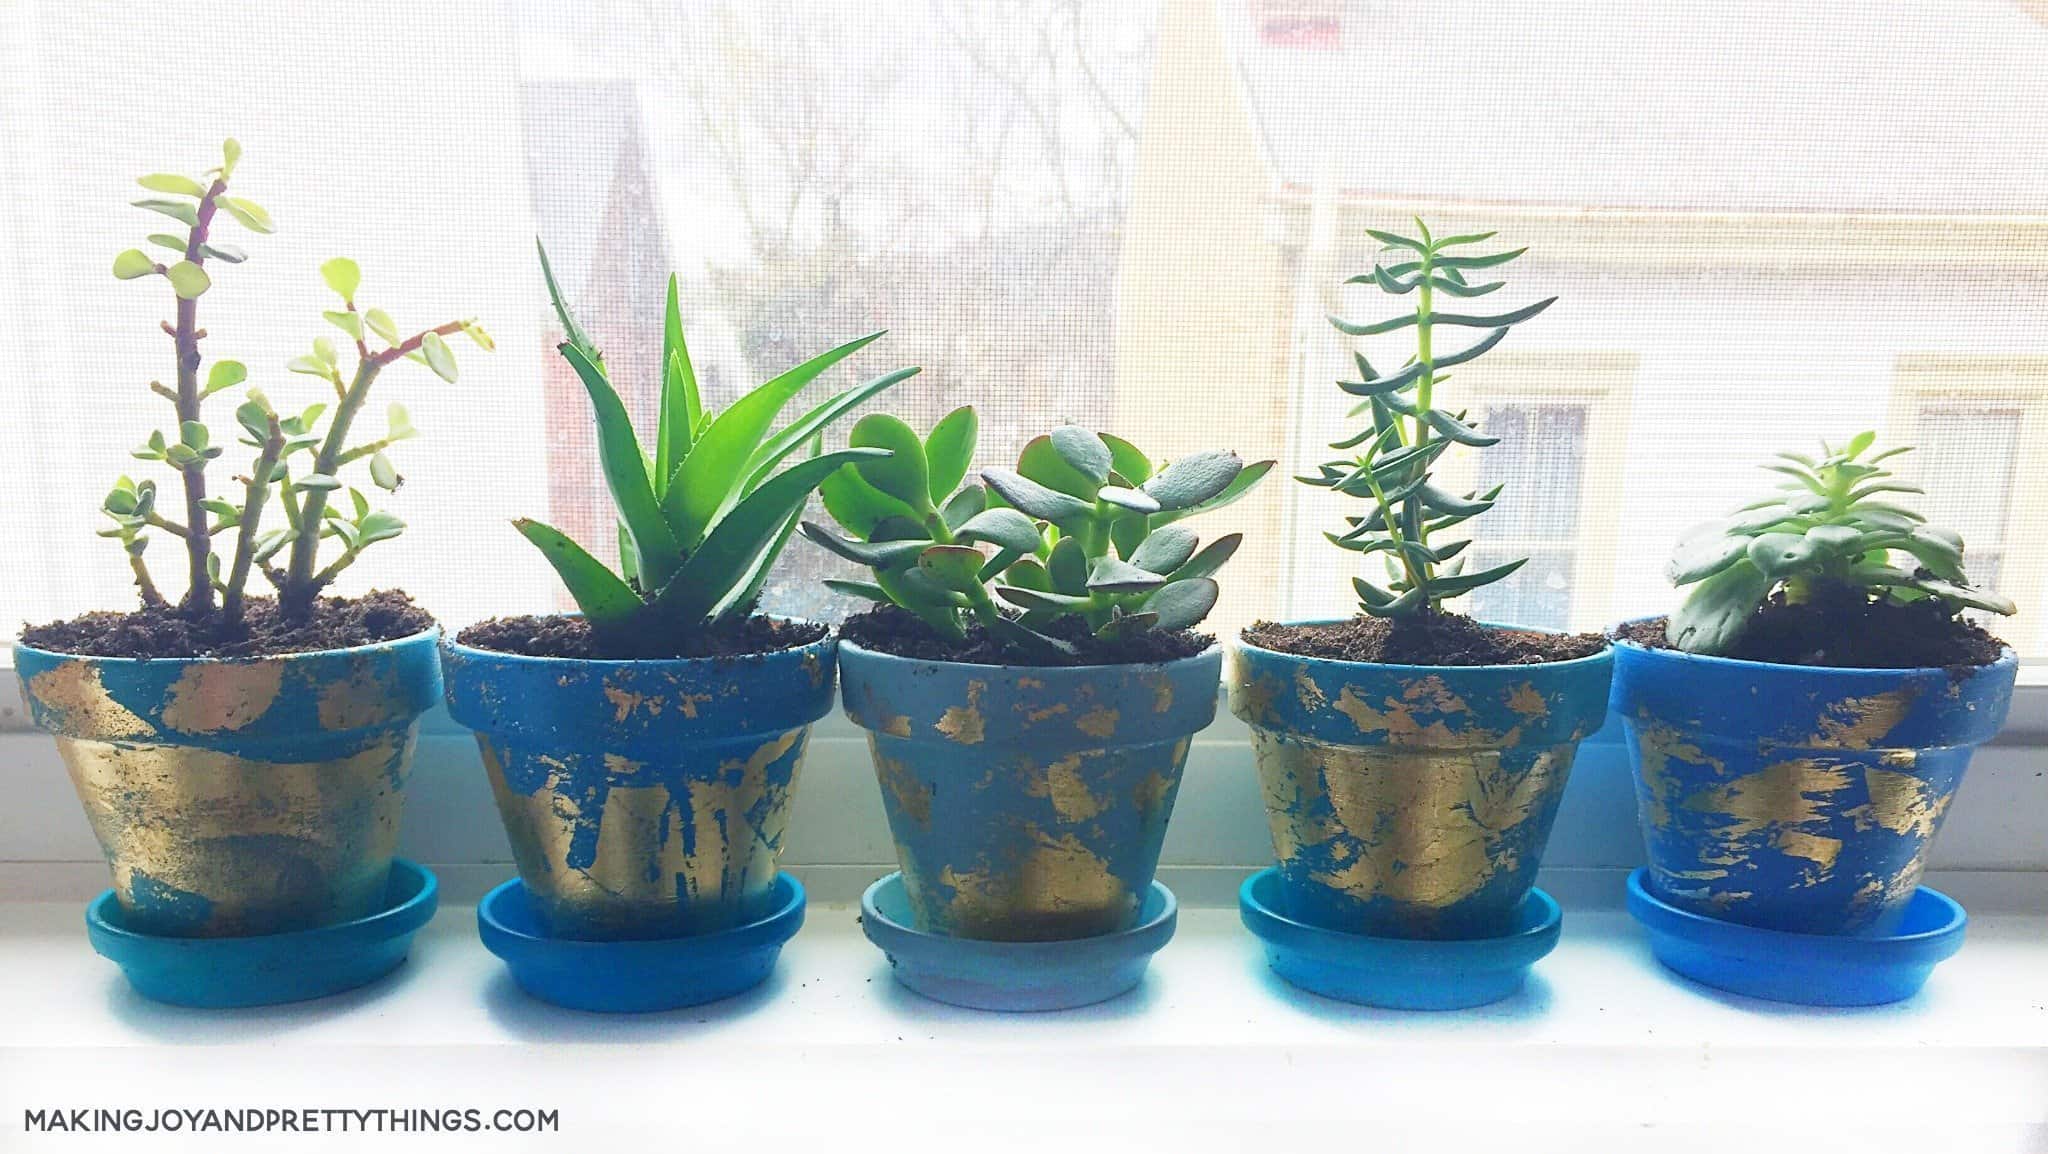 The possibilities are endless when making these diy gold leaf planters. Paint whatever color you want and apply the gold foil in a random fashion